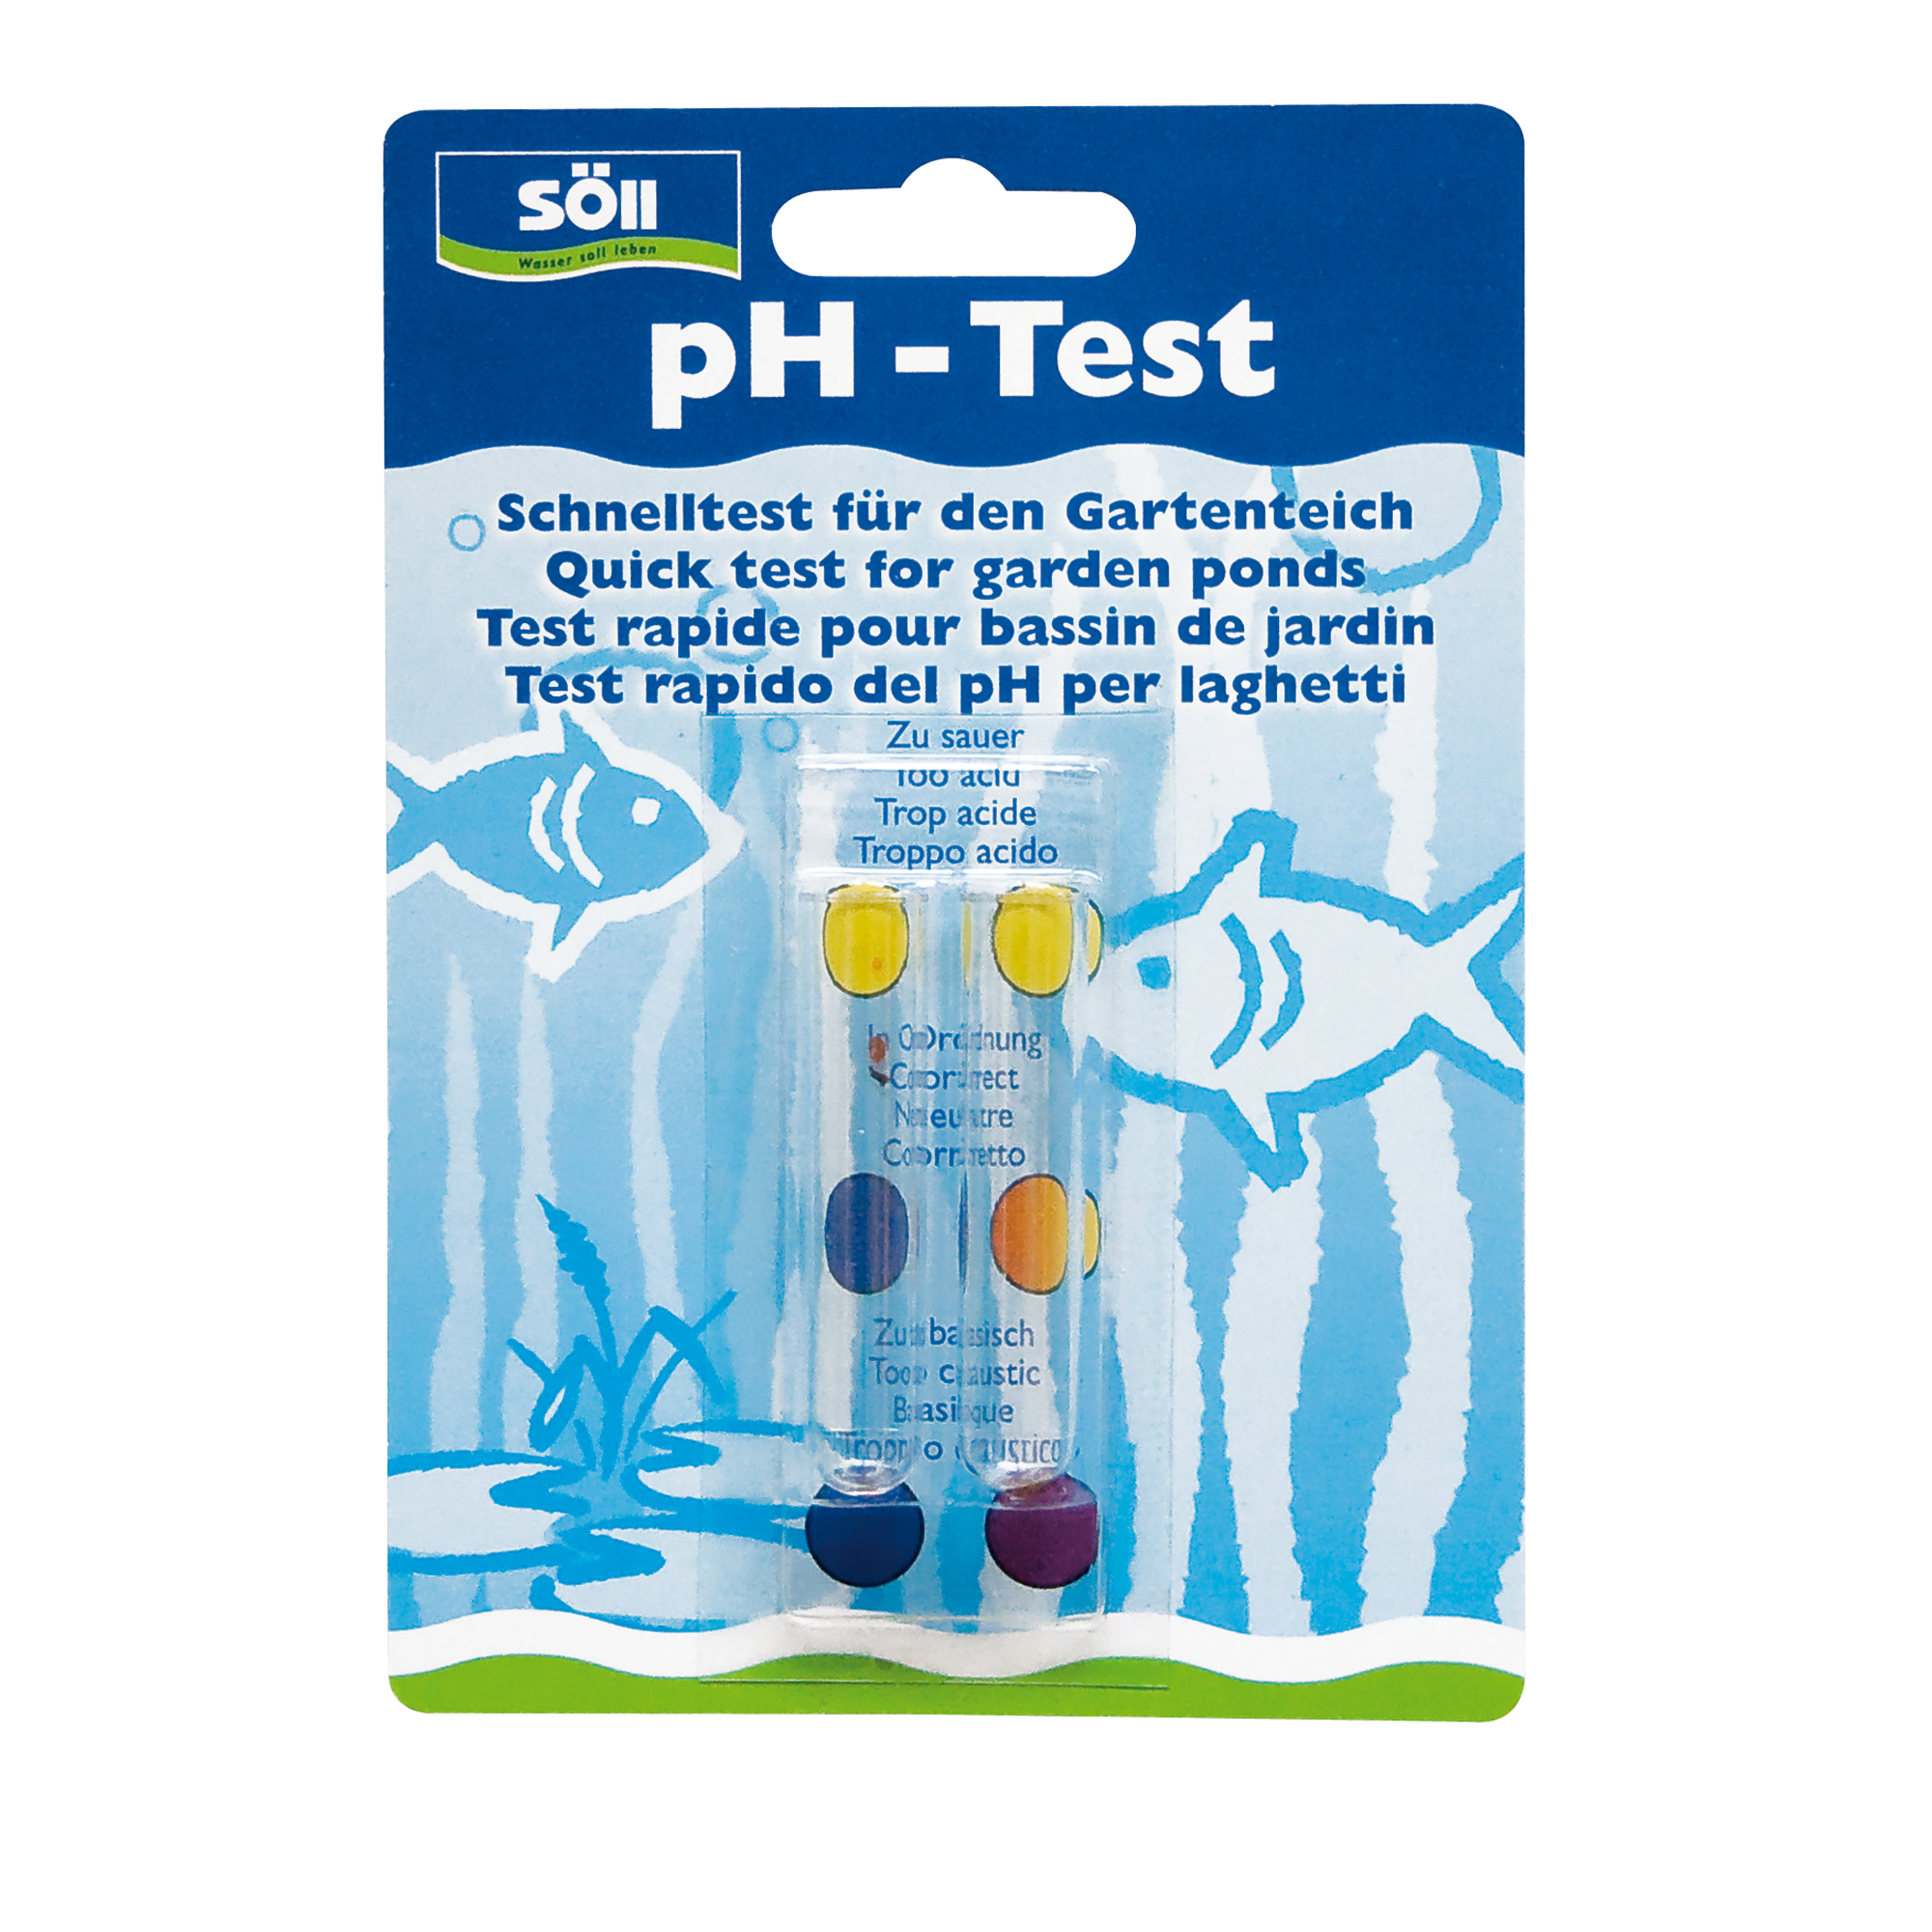 pH-Schnelltest + product picture